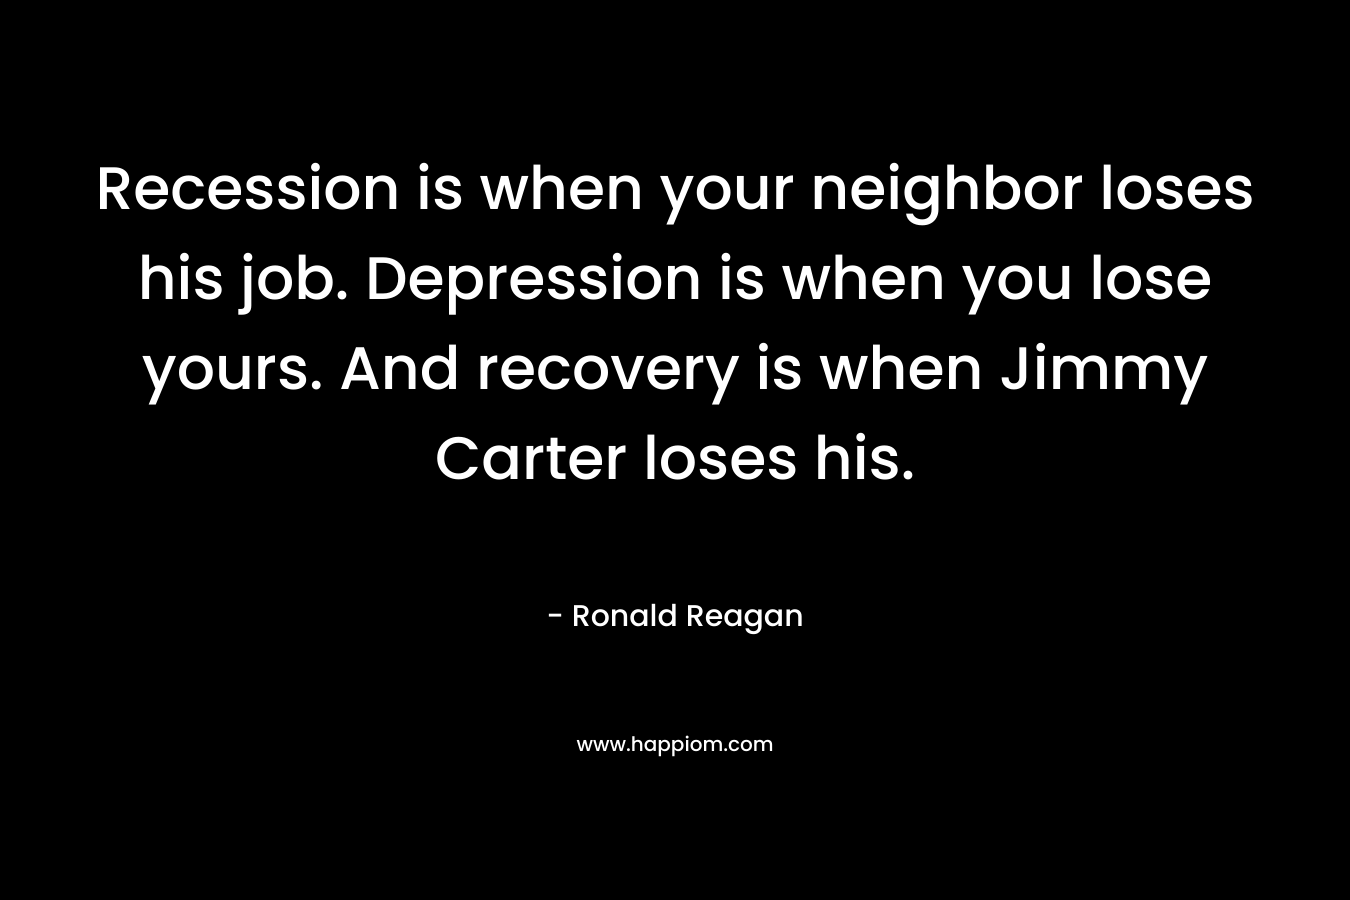 Recession is when your neighbor loses his job. Depression is when you lose yours. And recovery is when Jimmy Carter loses his. – Ronald Reagan